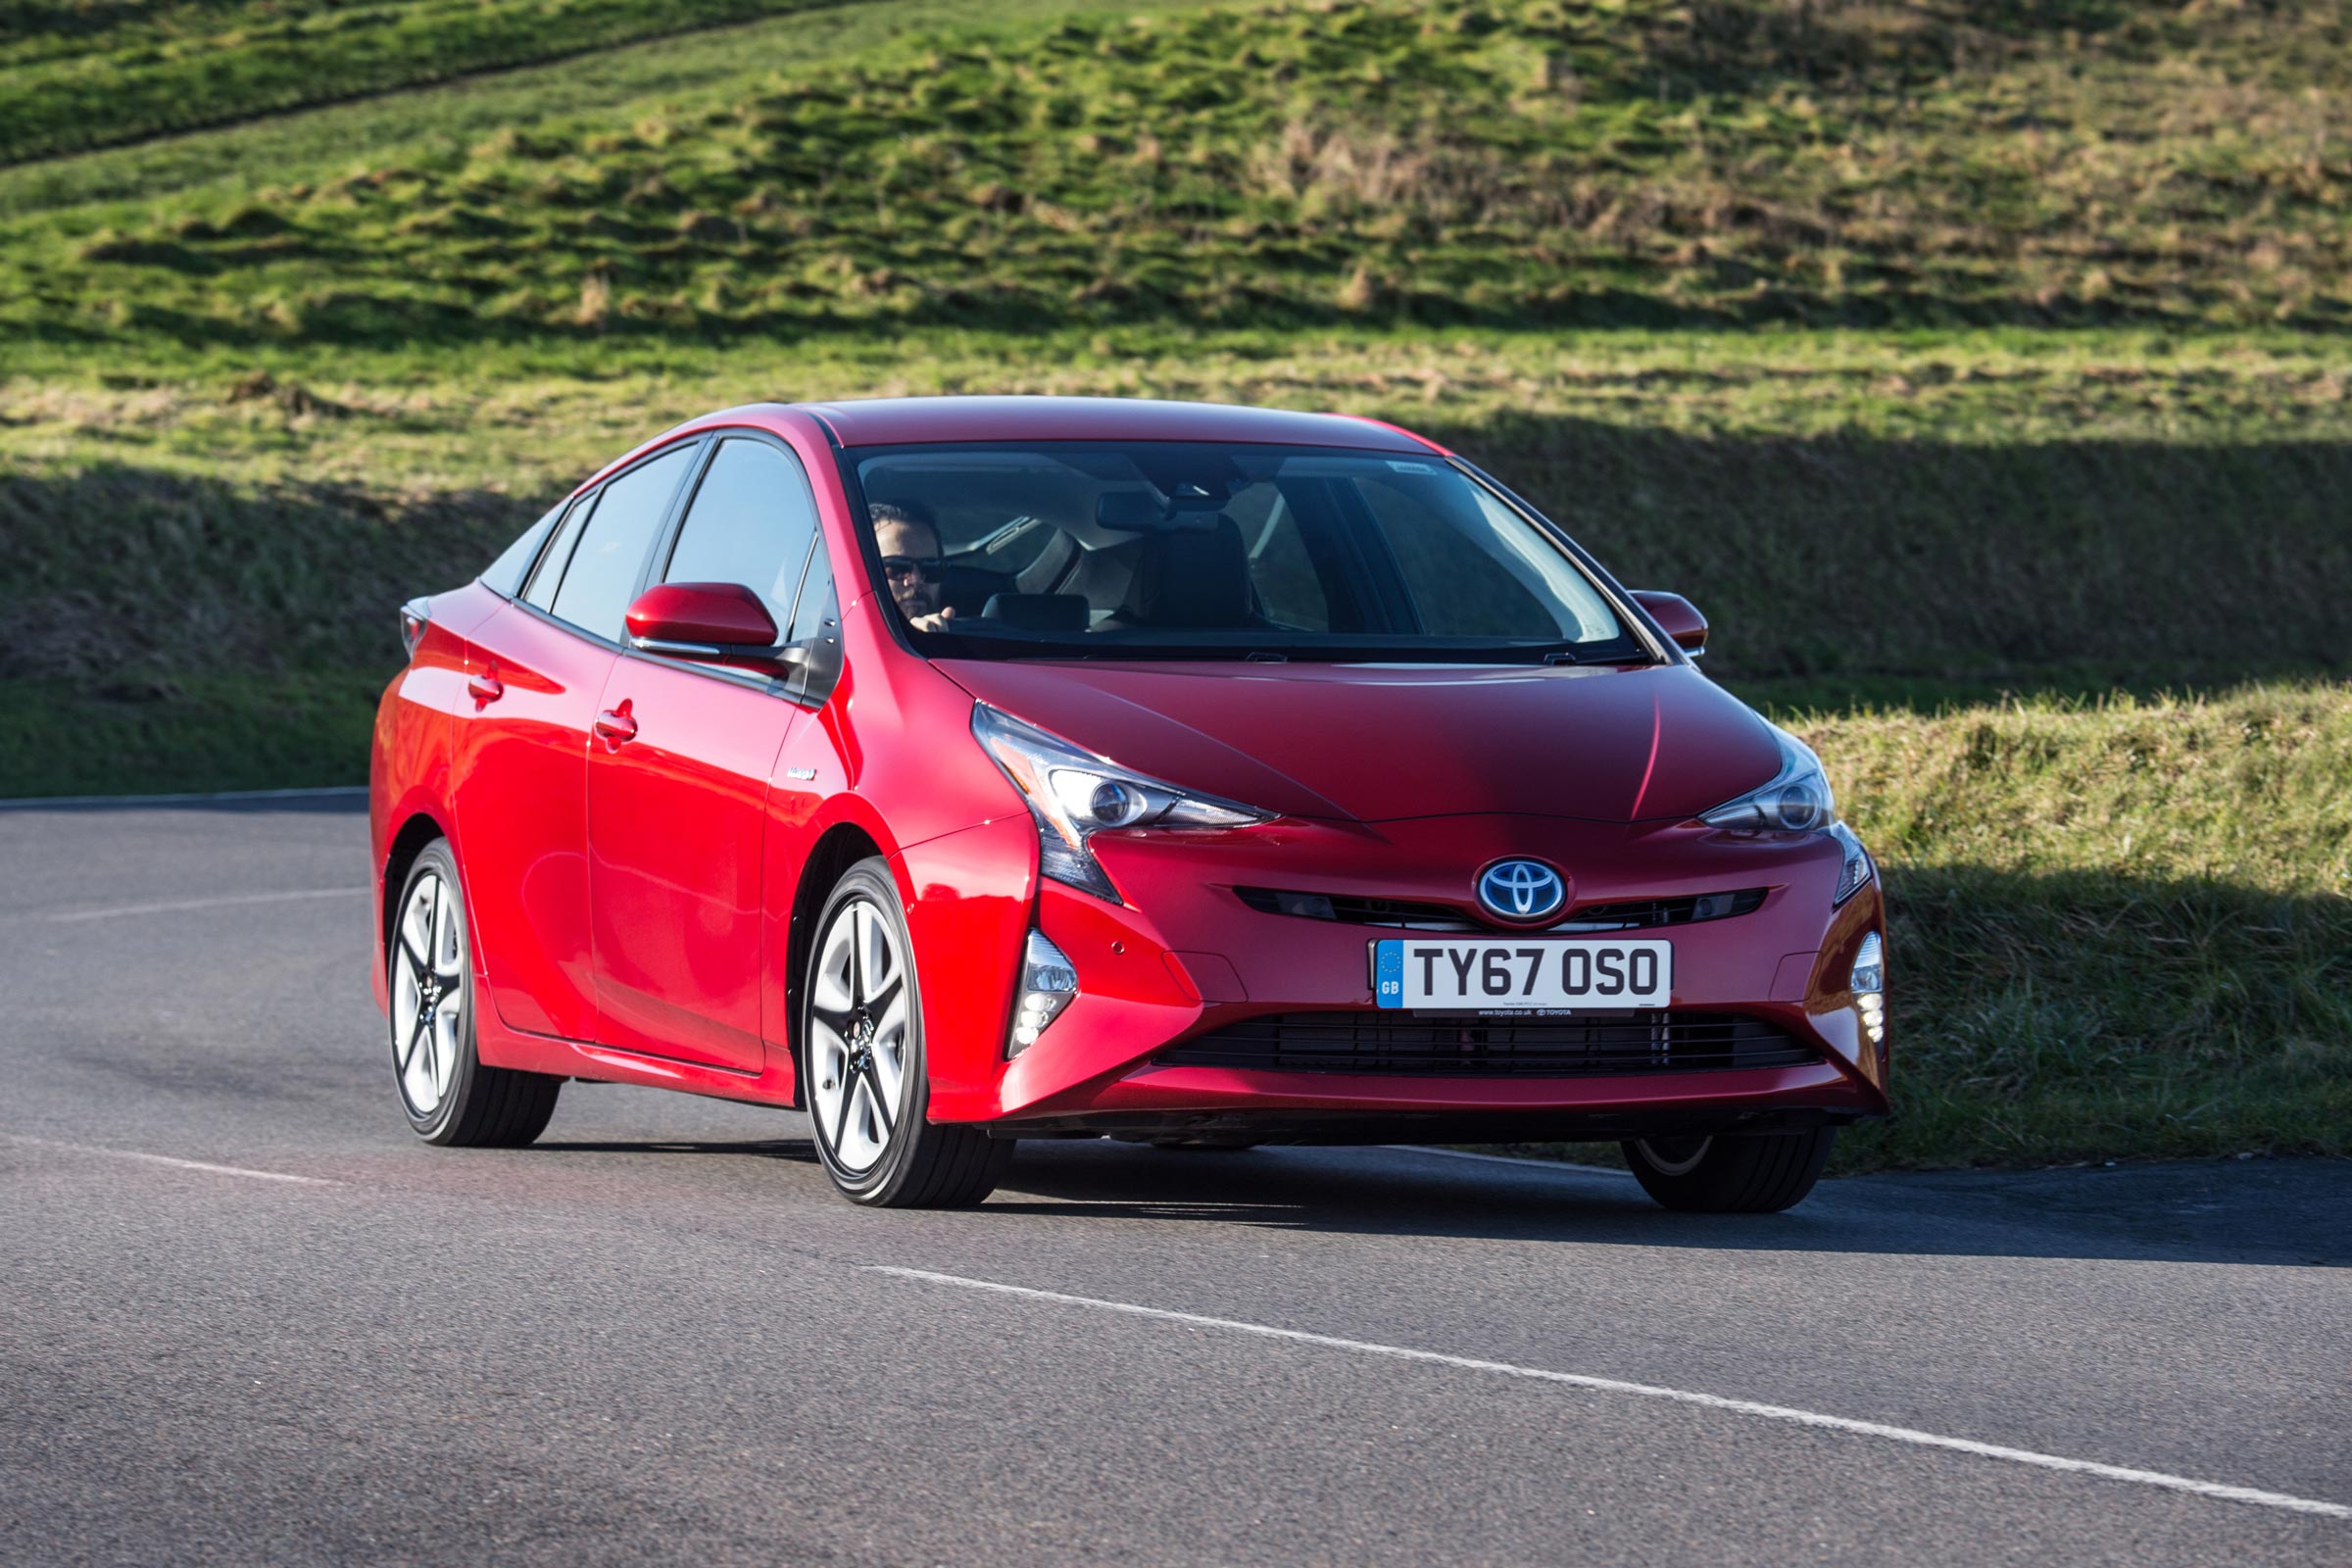 Toyota Prius hybrid no longer exempt from London